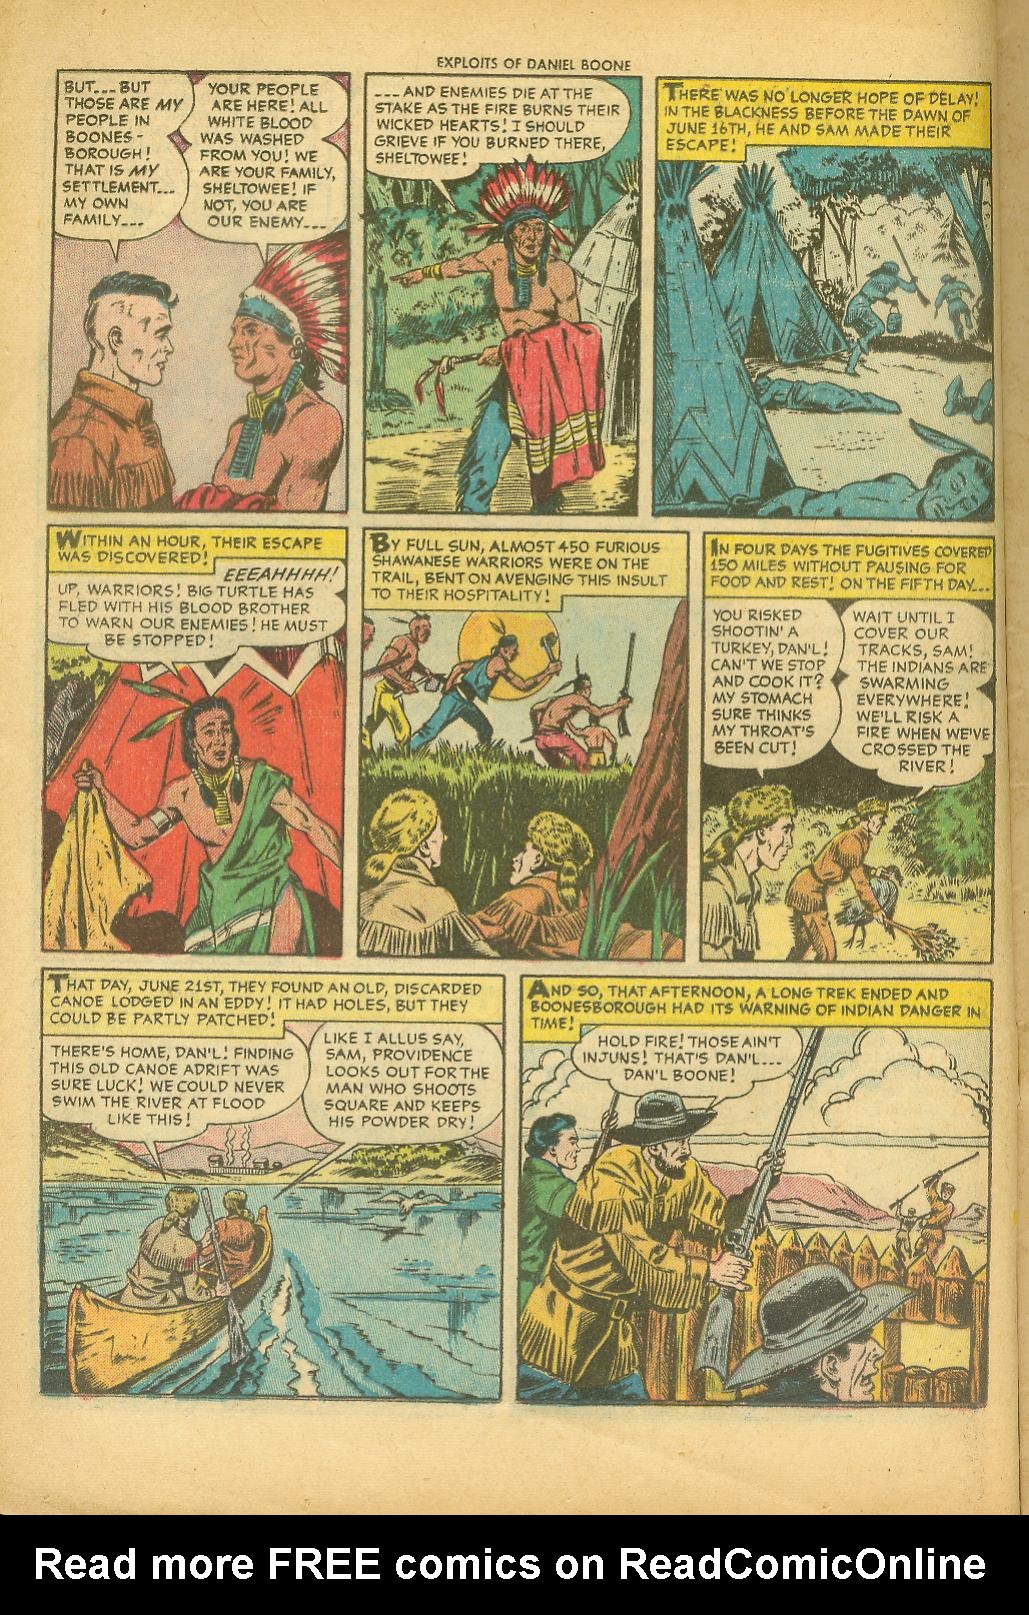 Read online Exploits of Daniel Boone comic -  Issue #1 - 12